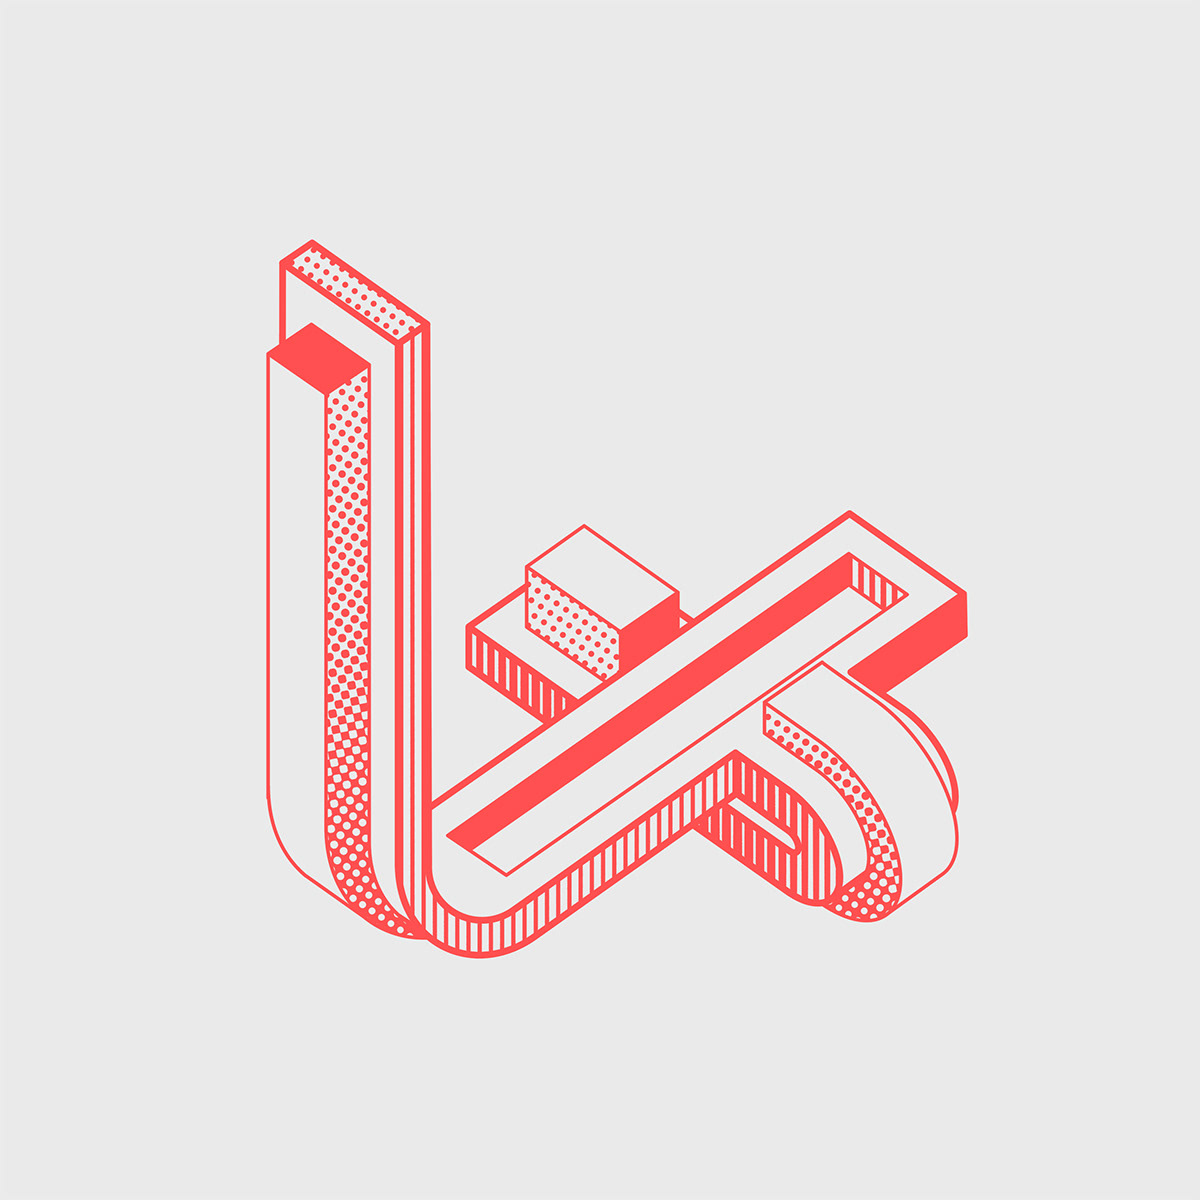 2.5D 3D lettering 3D Type adobe illustrator charles williams Isometric lettering numbers typography   vector